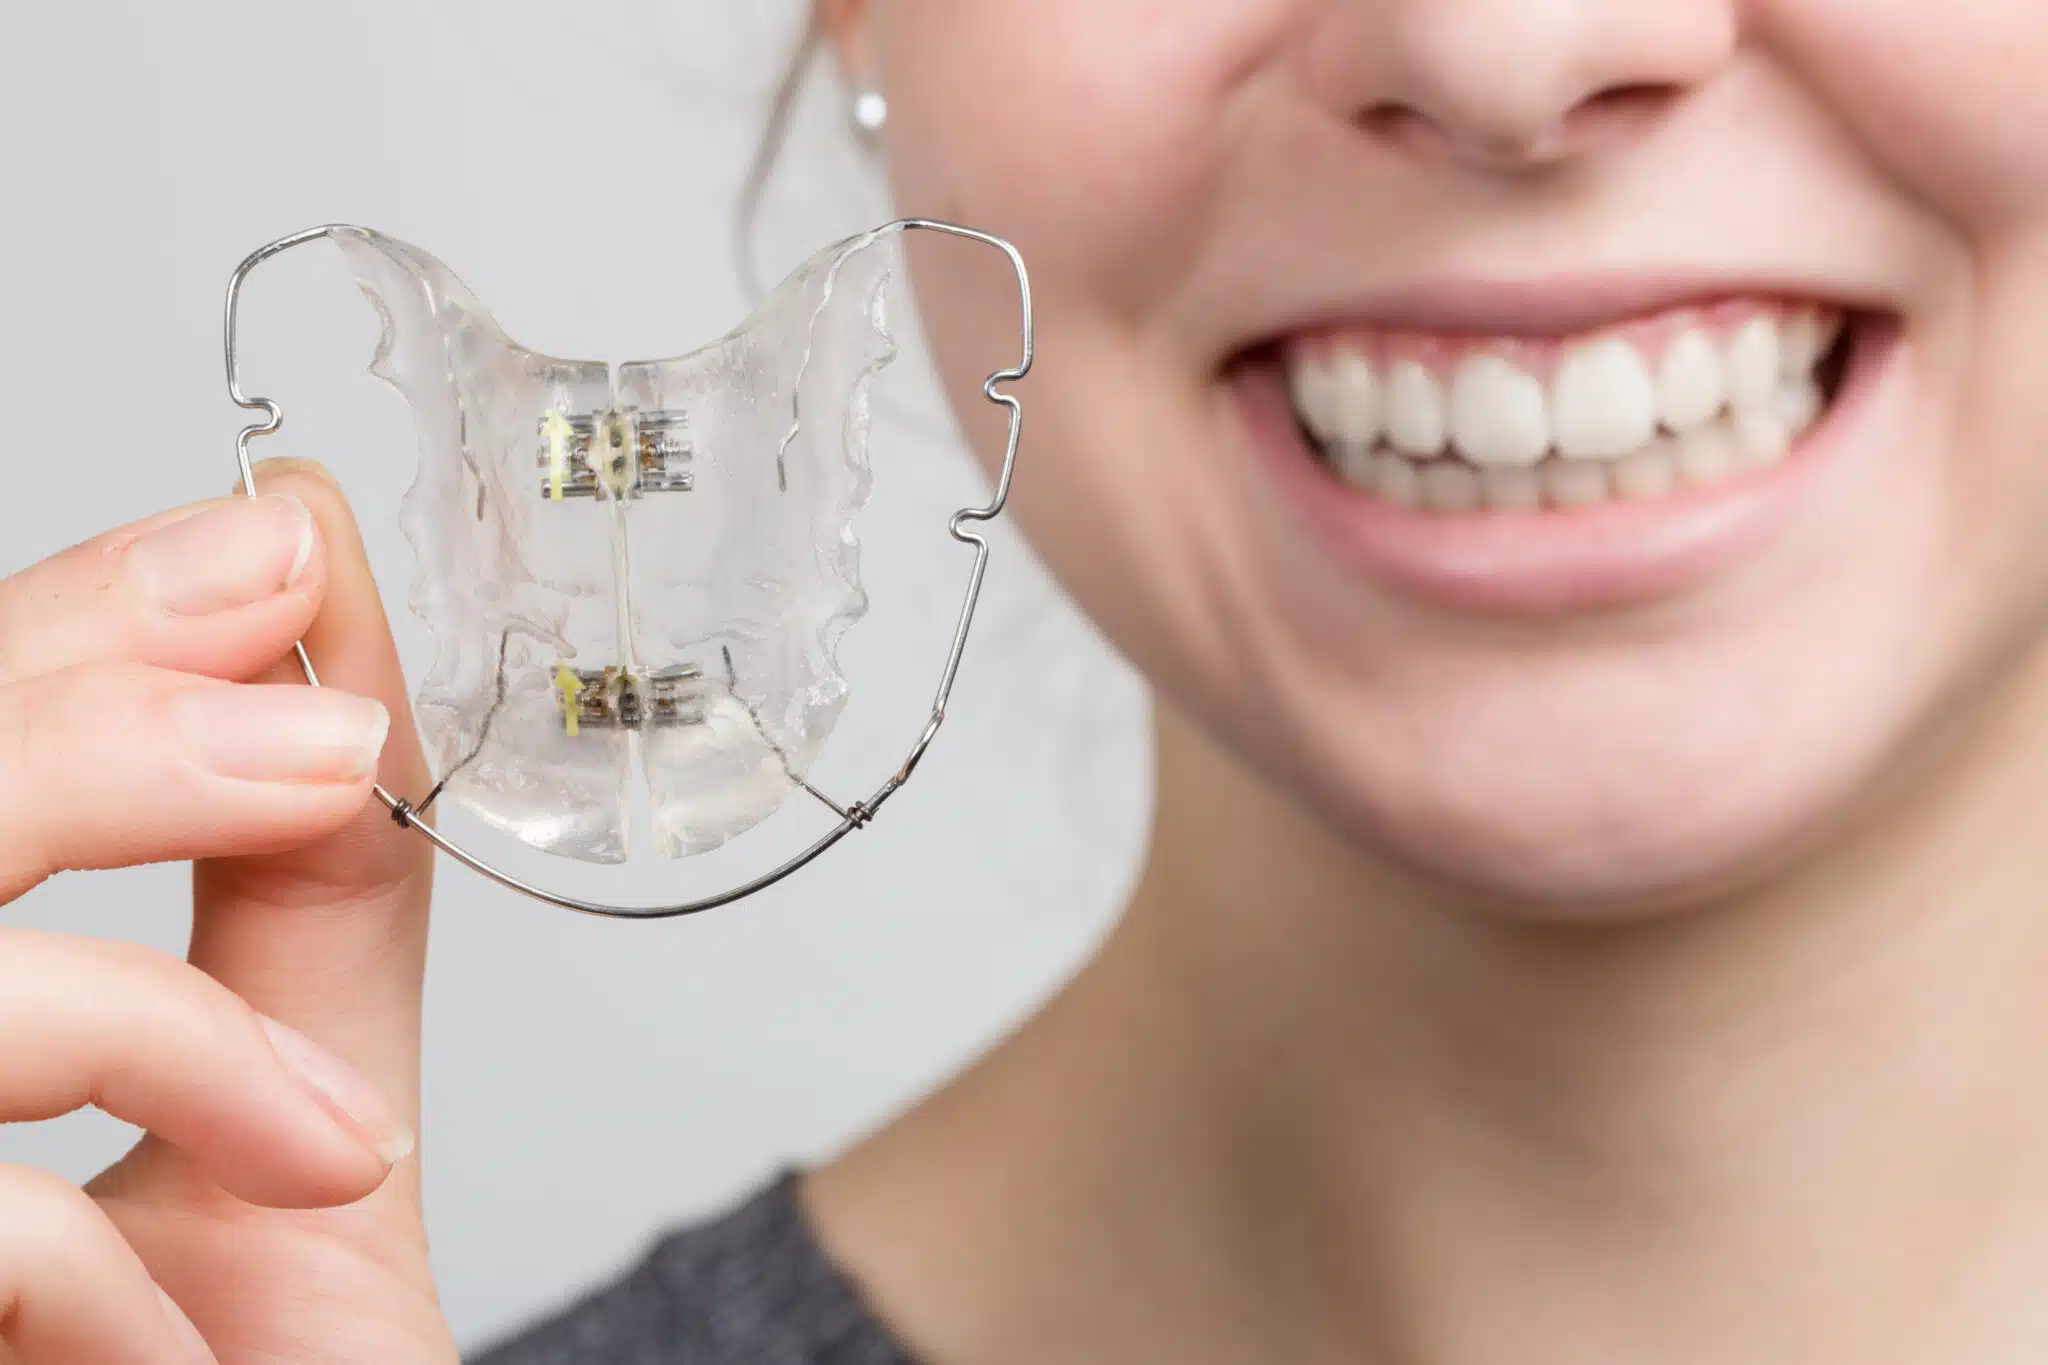 How Long Do I Need to Wear My Retainer?